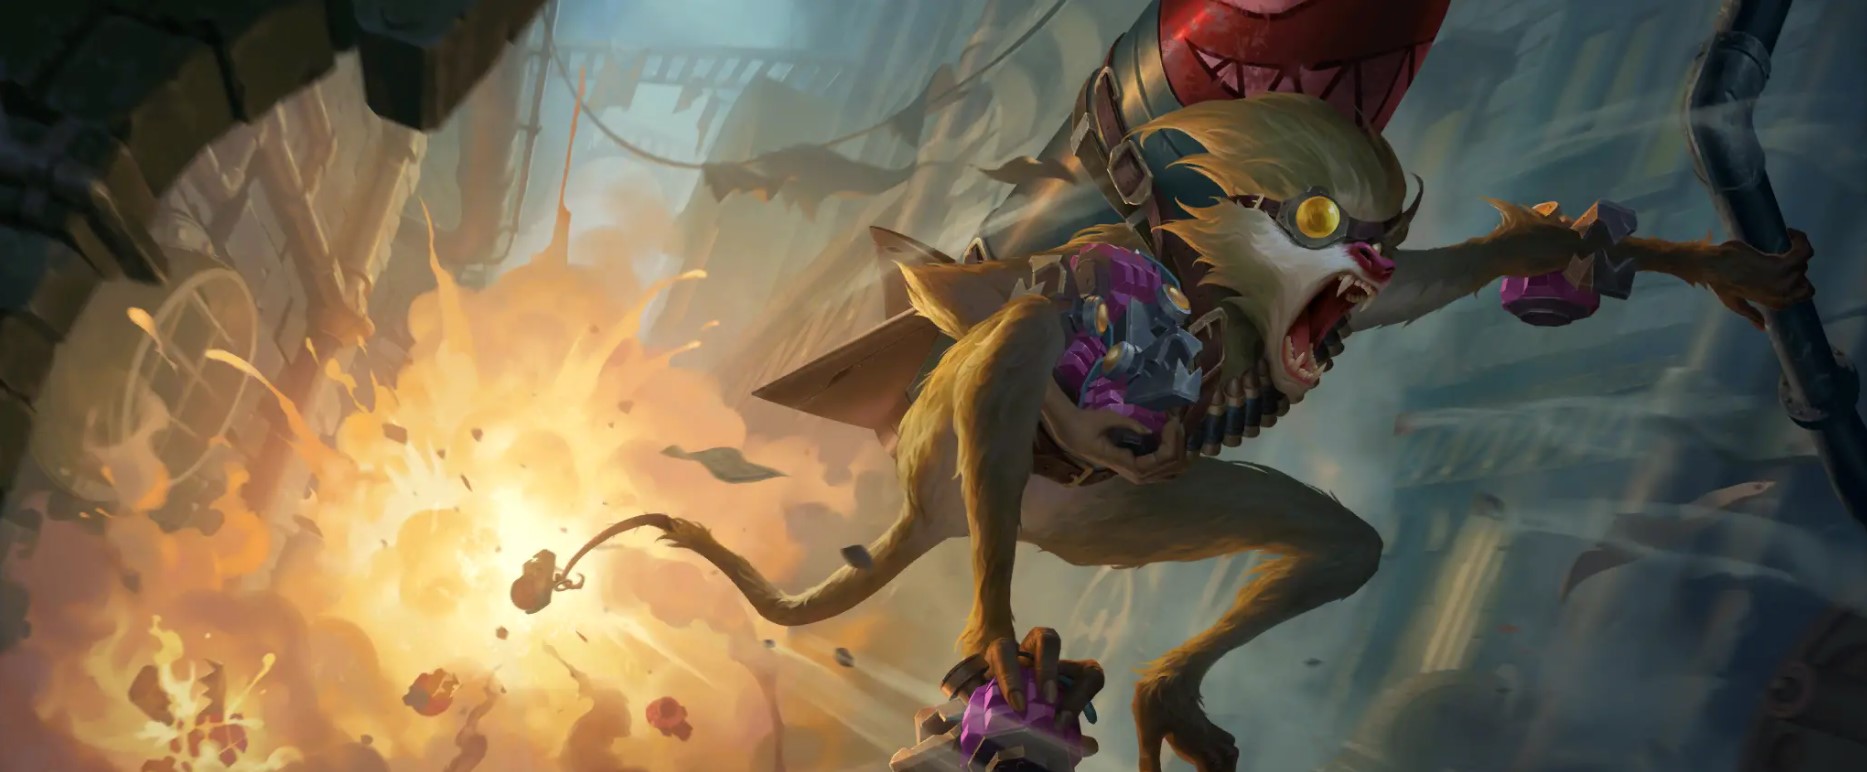 Rise of the Underworlds LoR Card Impressions: Bilgewater, PnZ, and Shurima Variety Pack